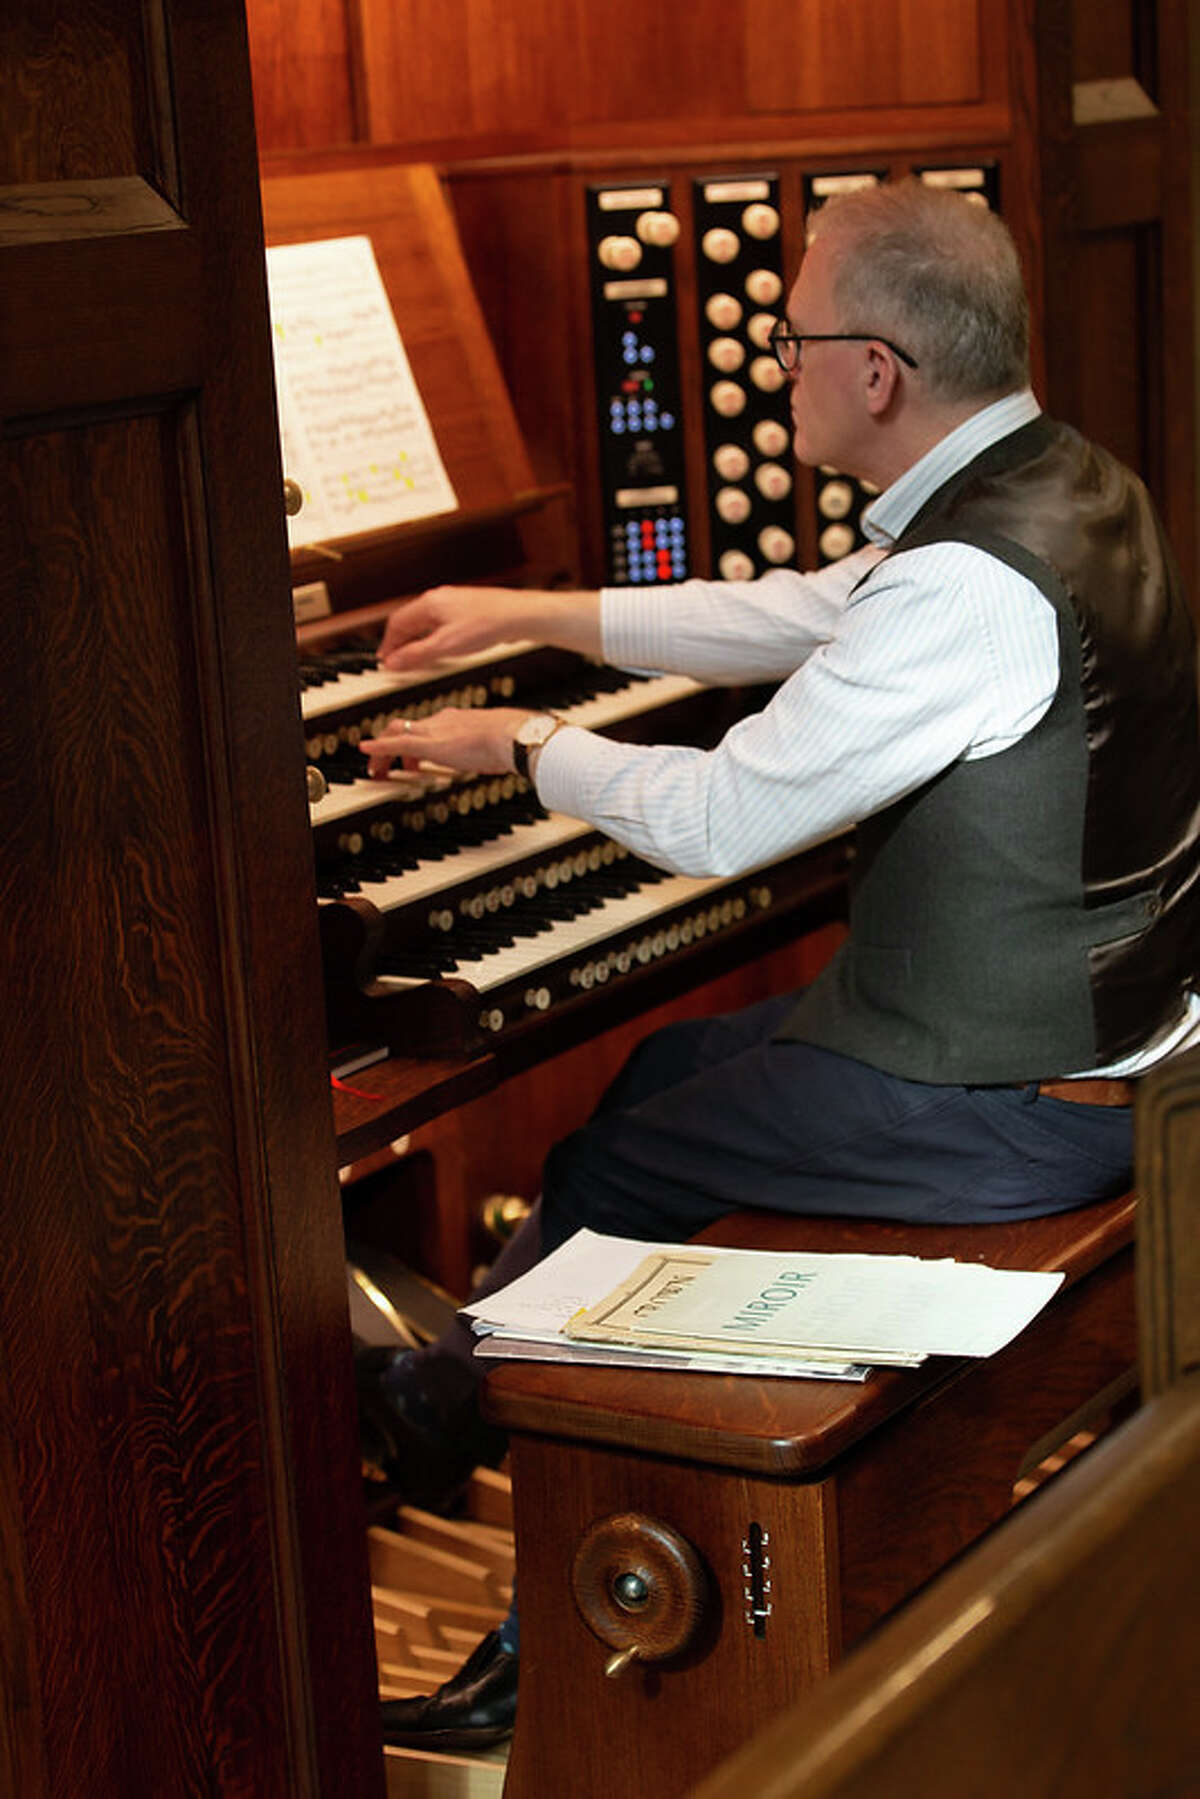 James O'Donnell, former Organist and Master of the Choristers at Westminster Abbey, plays the organ at Christ Church in Greenwich.